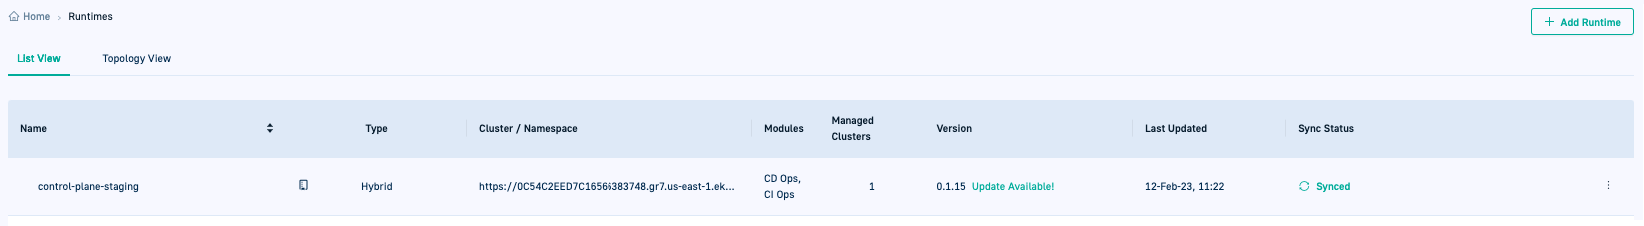 Succesfully installed Hybrid GitOps runtime in Runtimes > List View